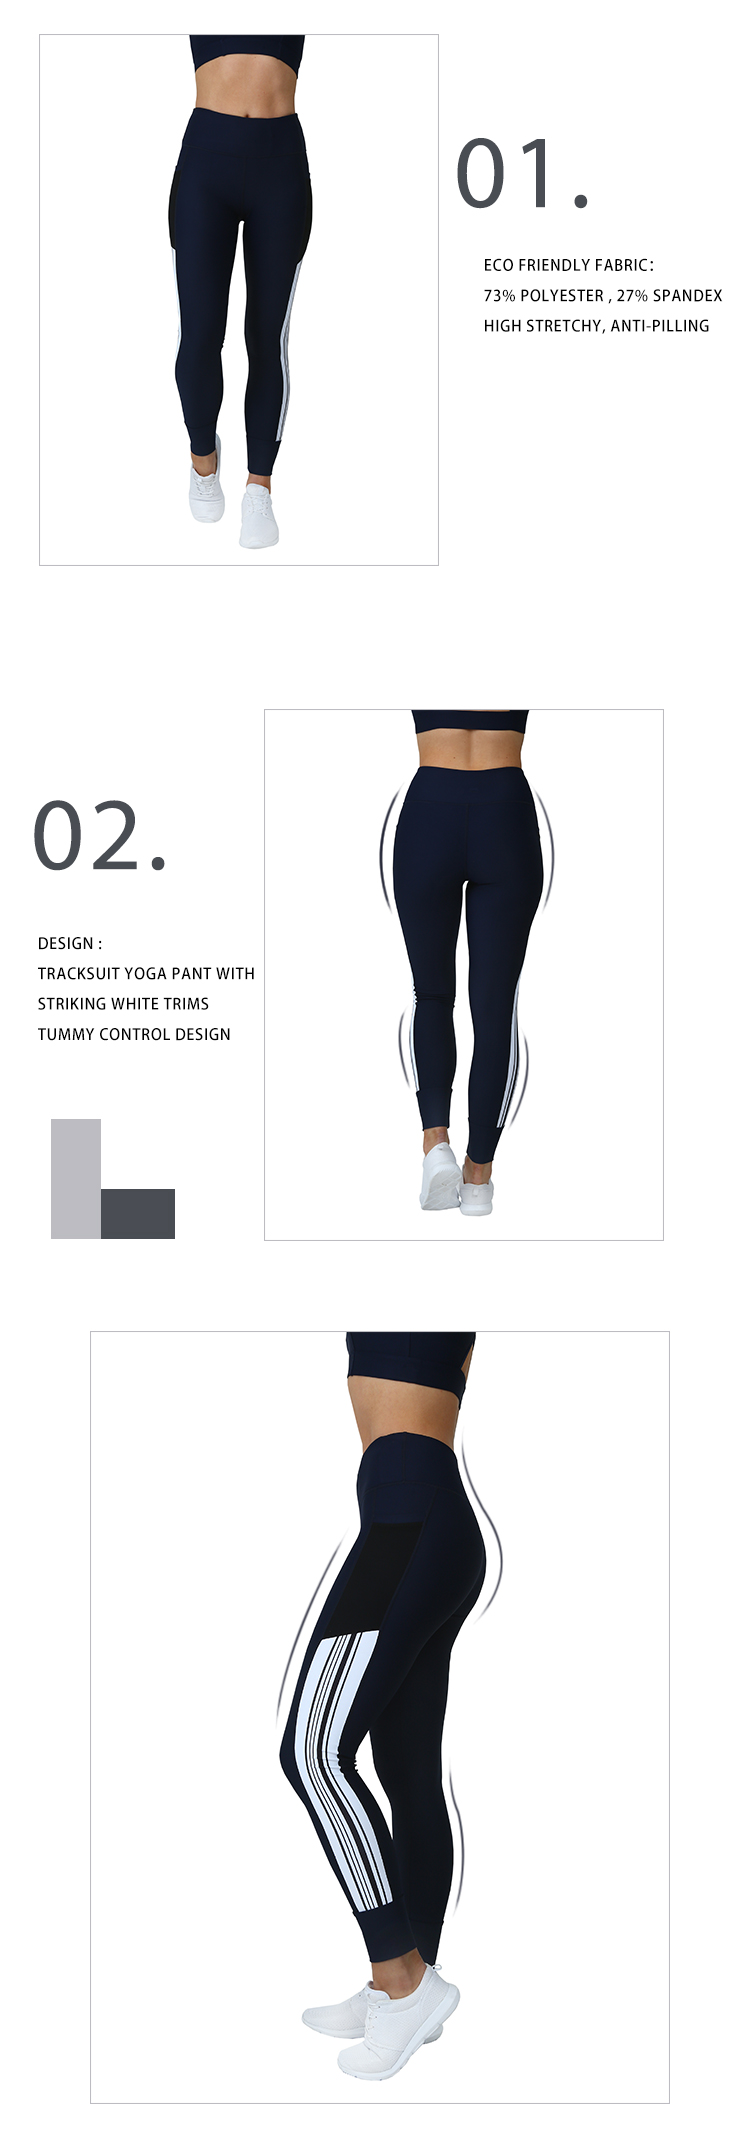 personalized casual yoga pants outfits overseas market for sport-6